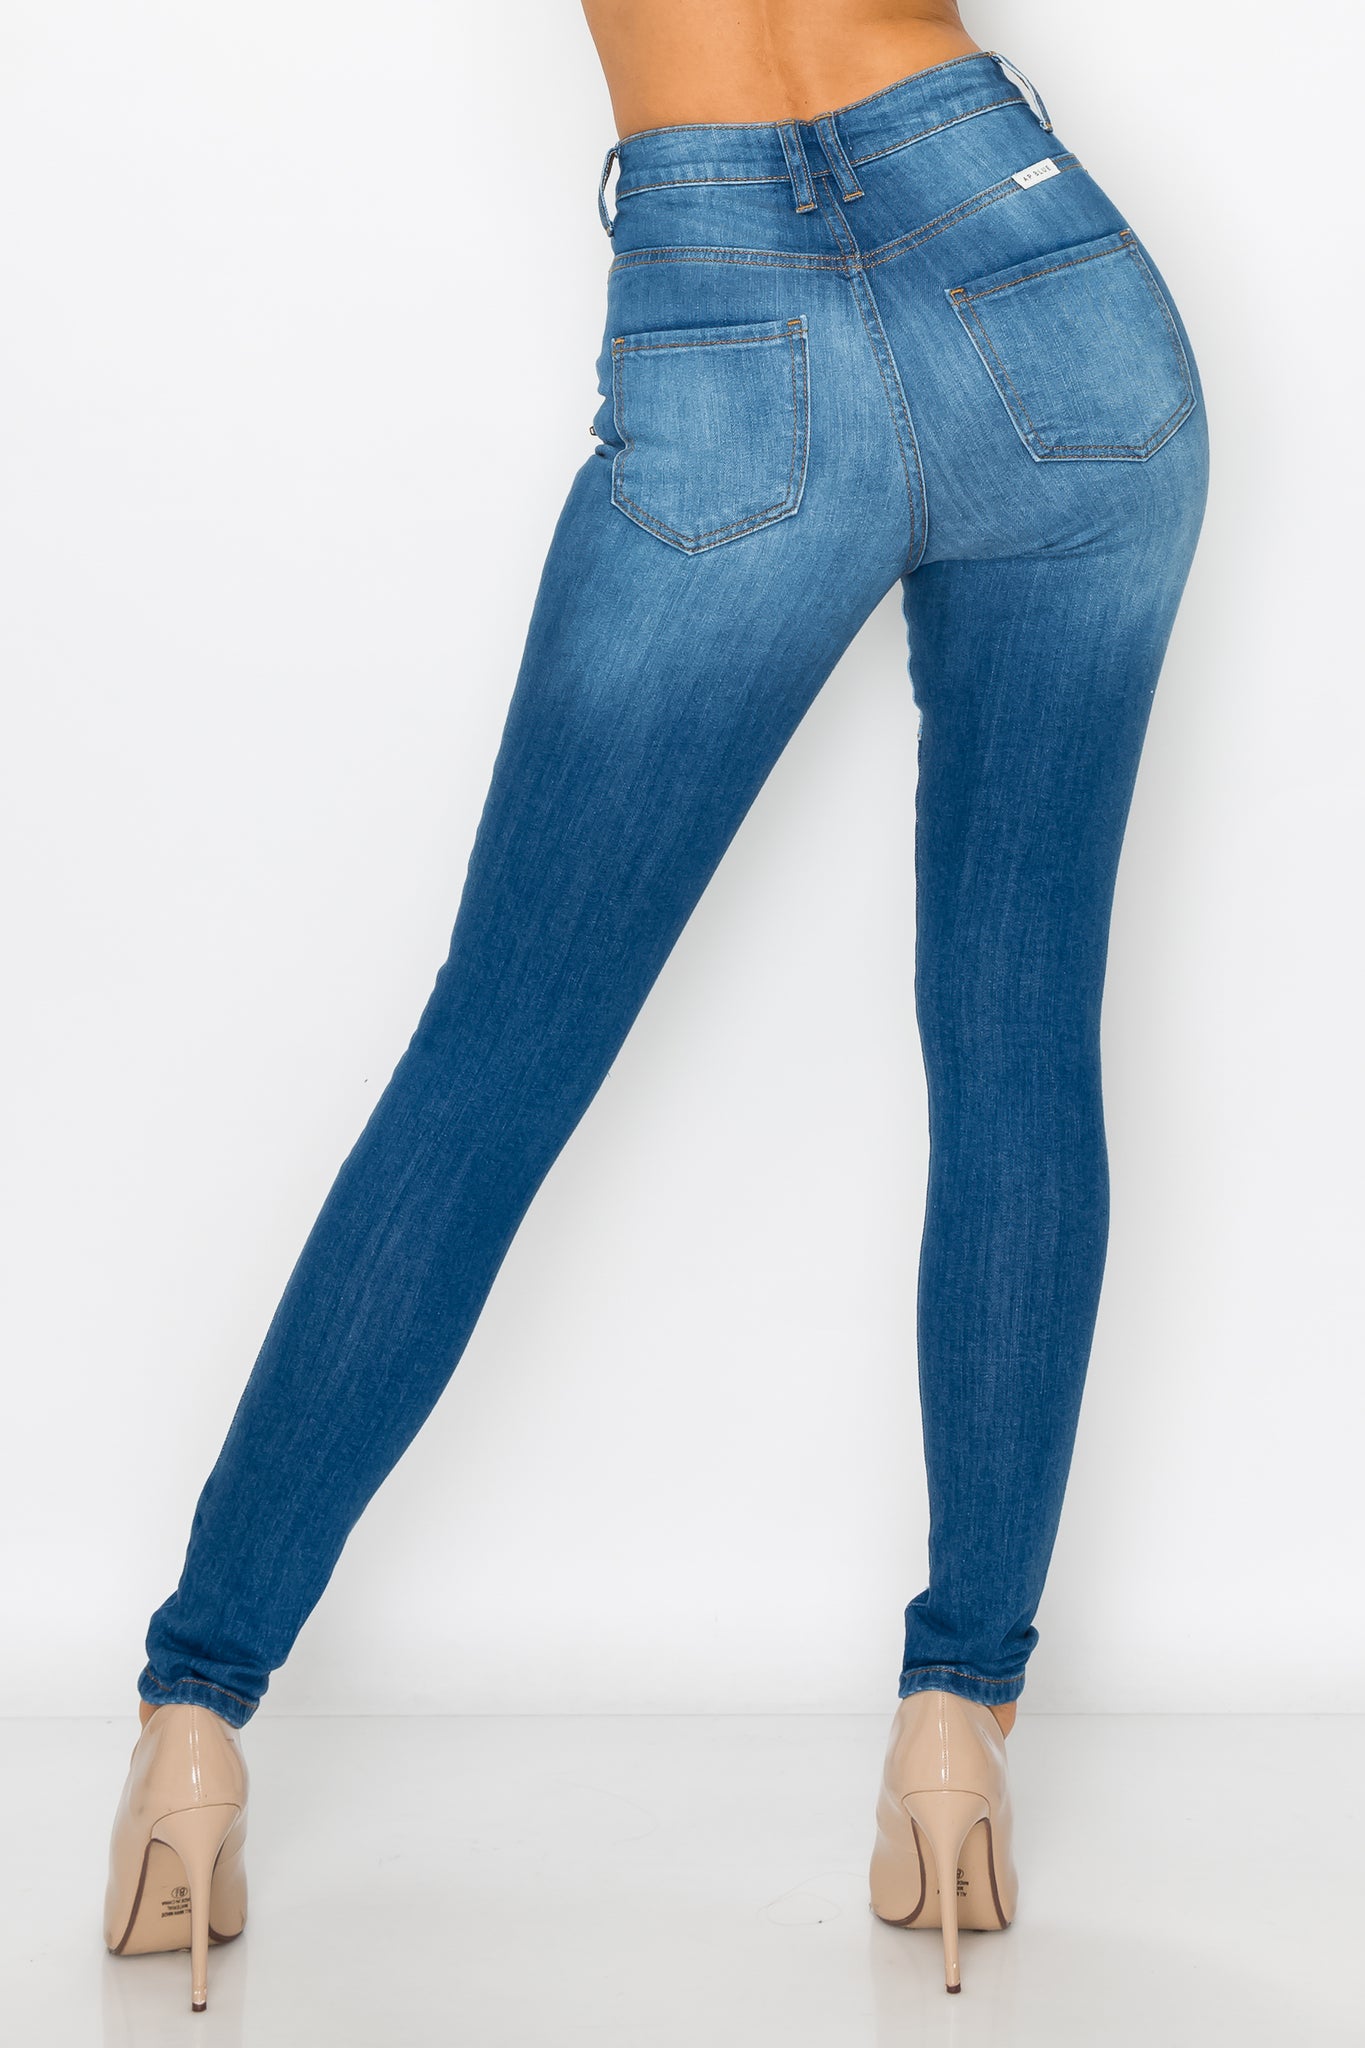 Distressed Jeans Outs High Aphrodite Cut Jeans with Flare – Waisted Super